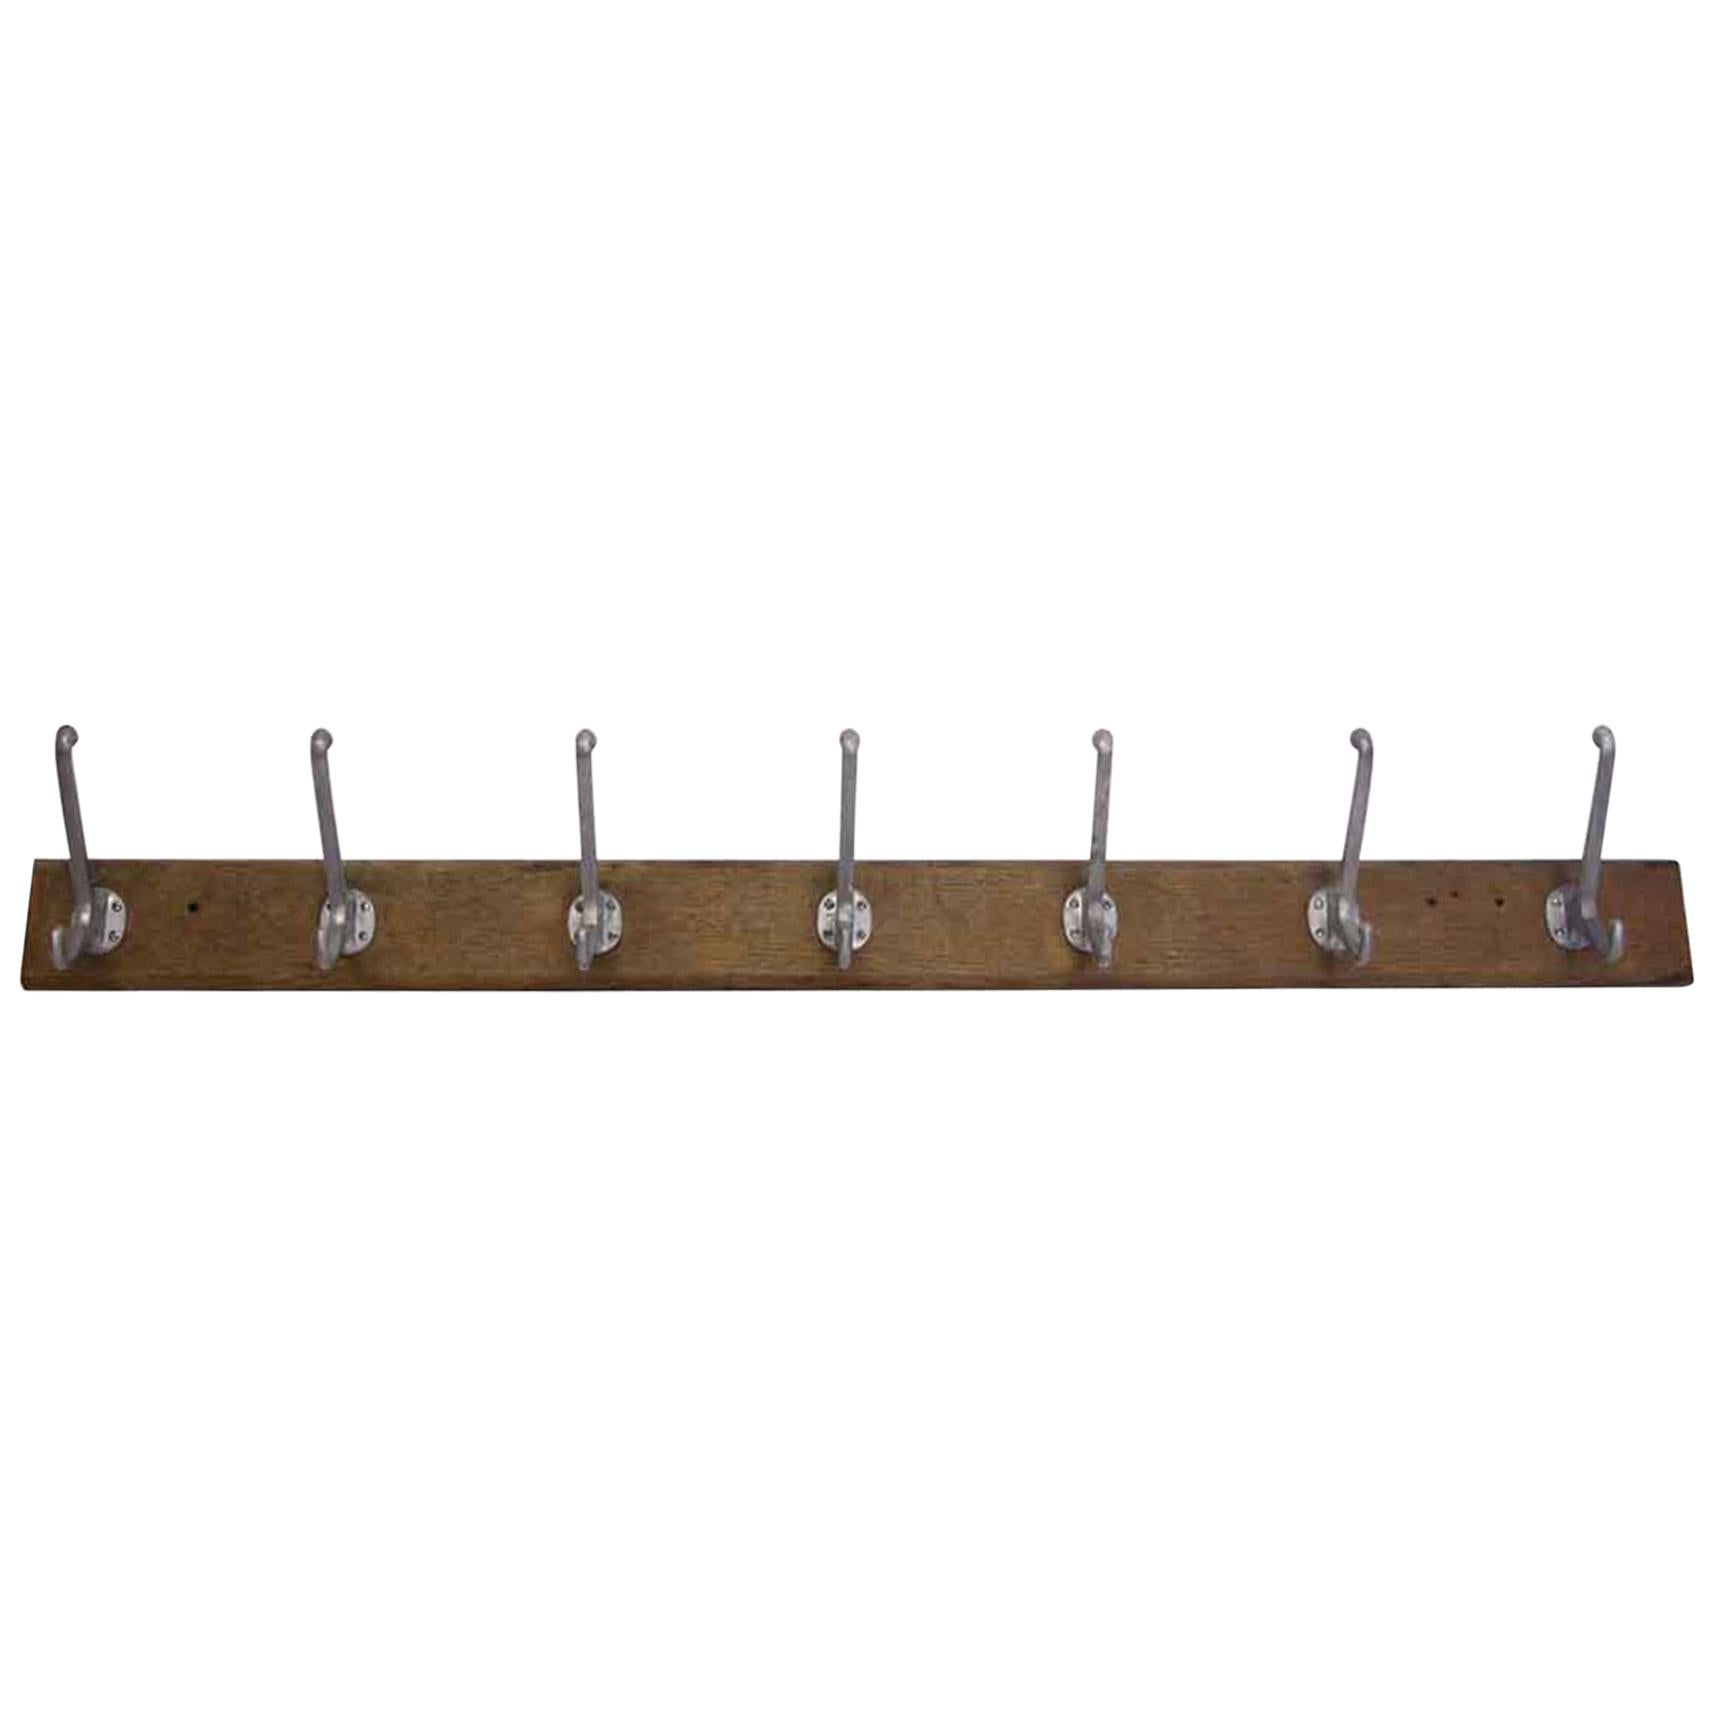 1990s Belgium Wall Mounted Coat Rack with Seven Hooks on a Wooden Plank